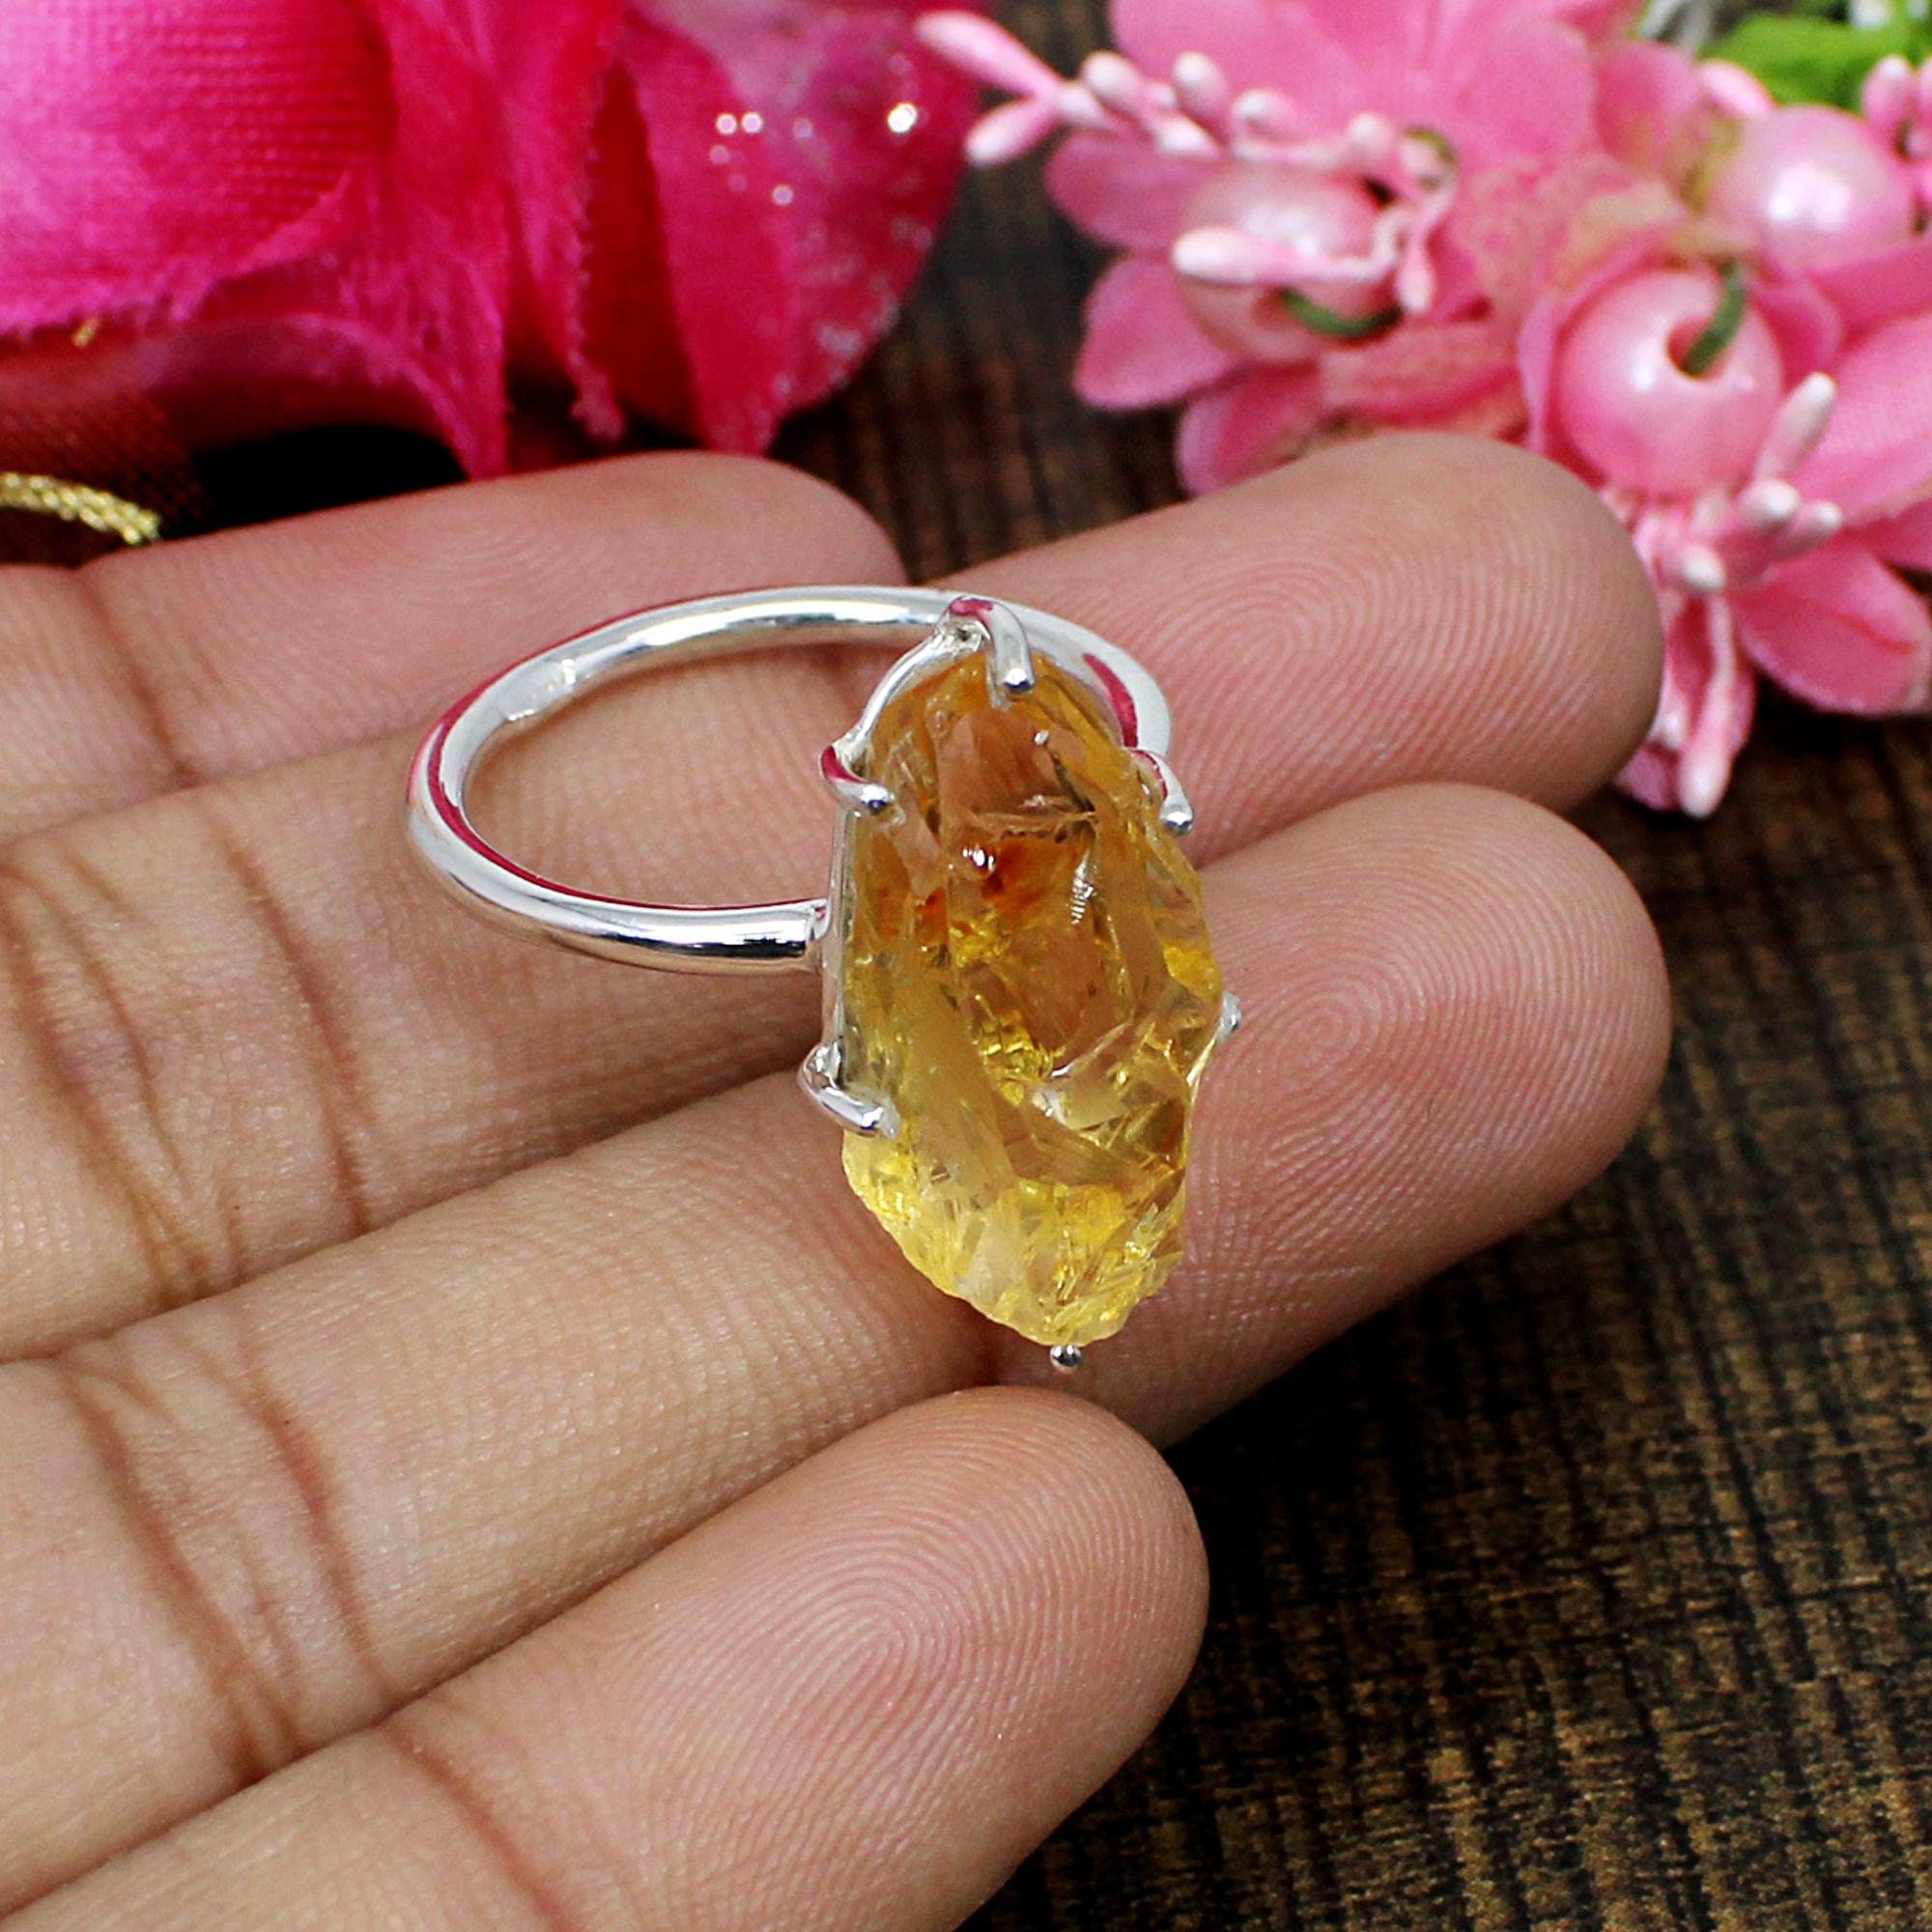 12 X 10MM Color Stone Birthstone Ring Diamond & Citrine Ring Set In Sterling Silver